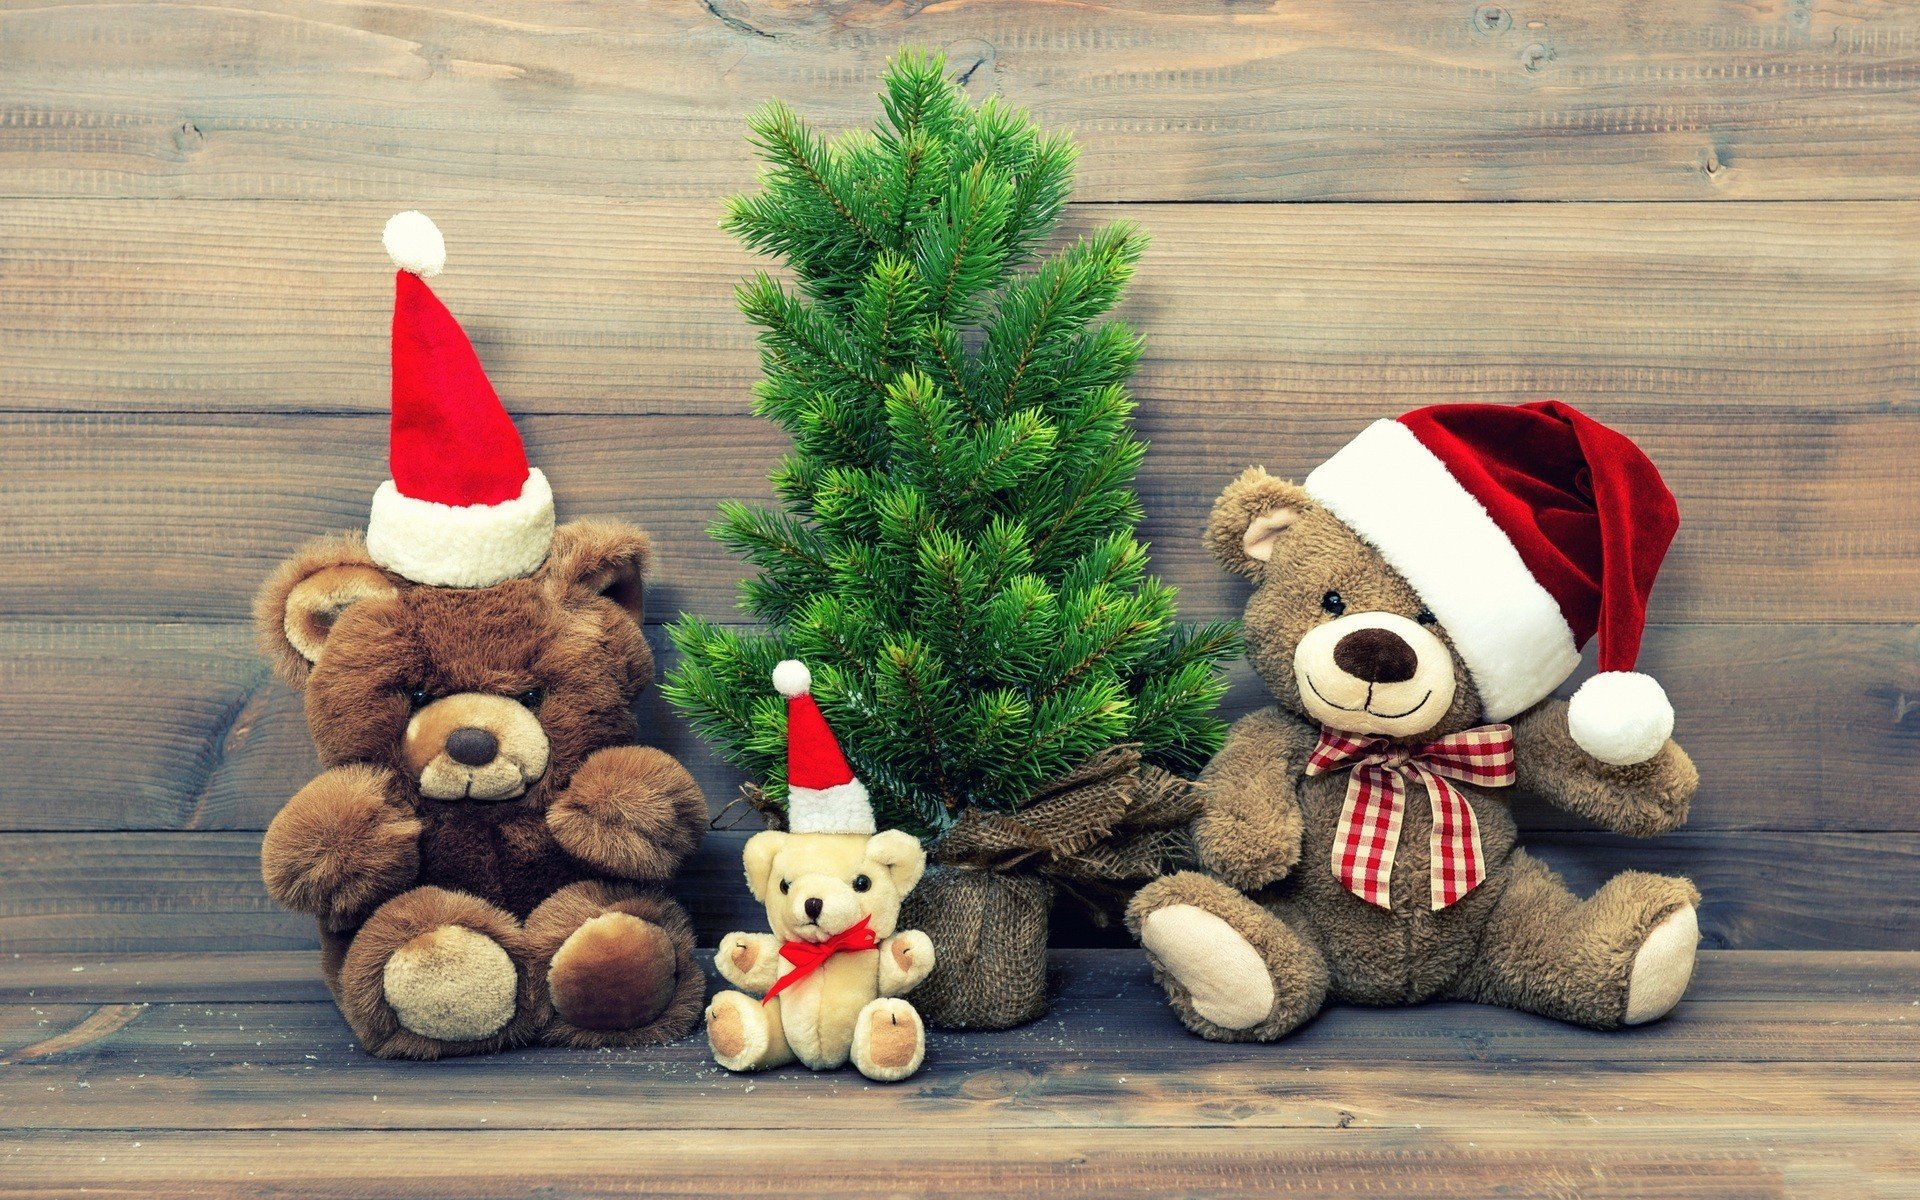 Download wallpapers Christmas, New Year, teddy bears, Santa Claus ...